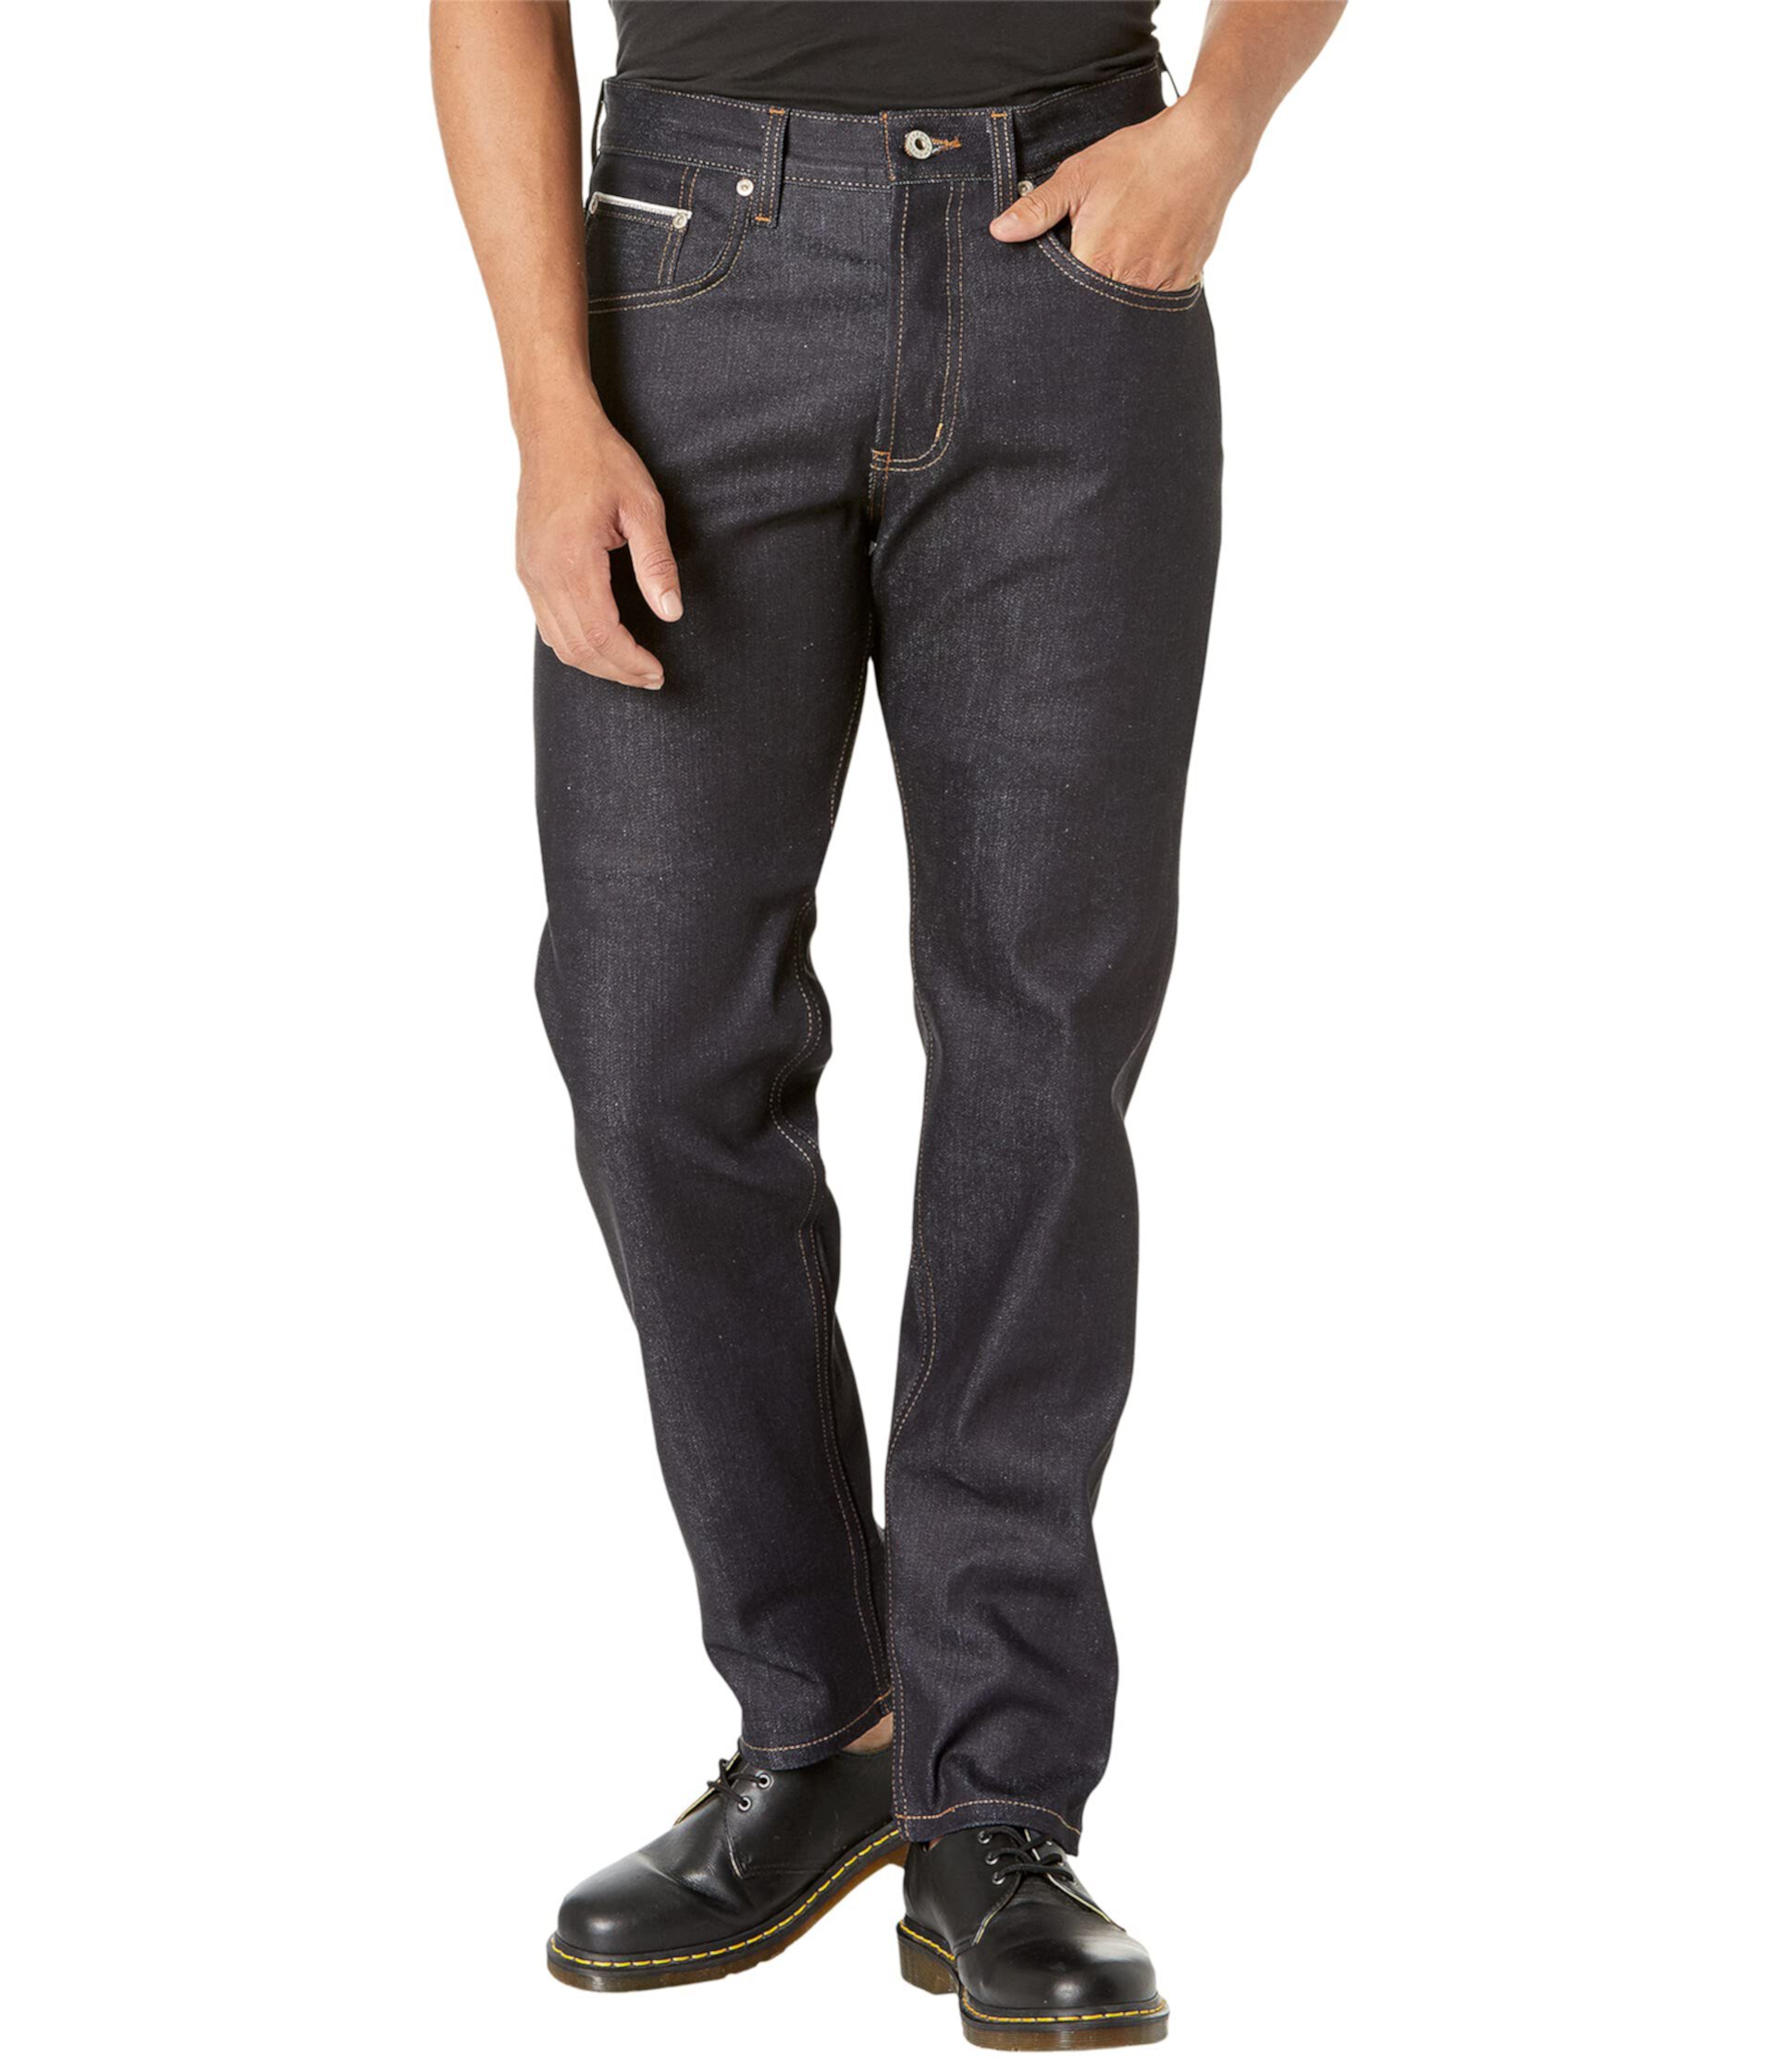 Easy Guy in Nightshade Stretch Selvdge Naked & Famous